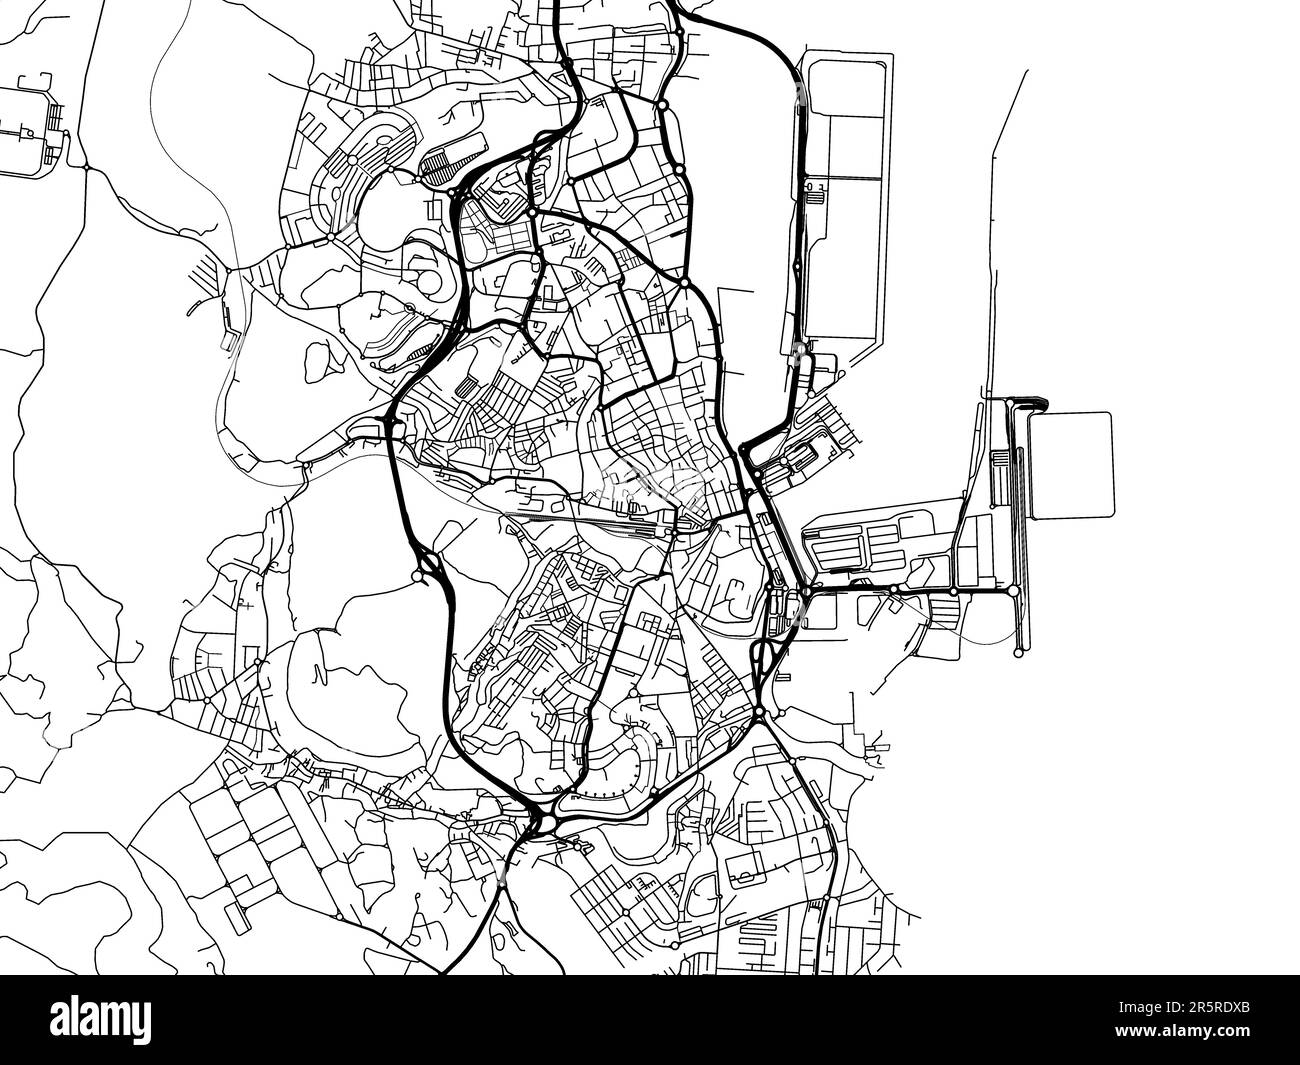 Road map of the city of Algeciras in Spain on a white background Stock ...